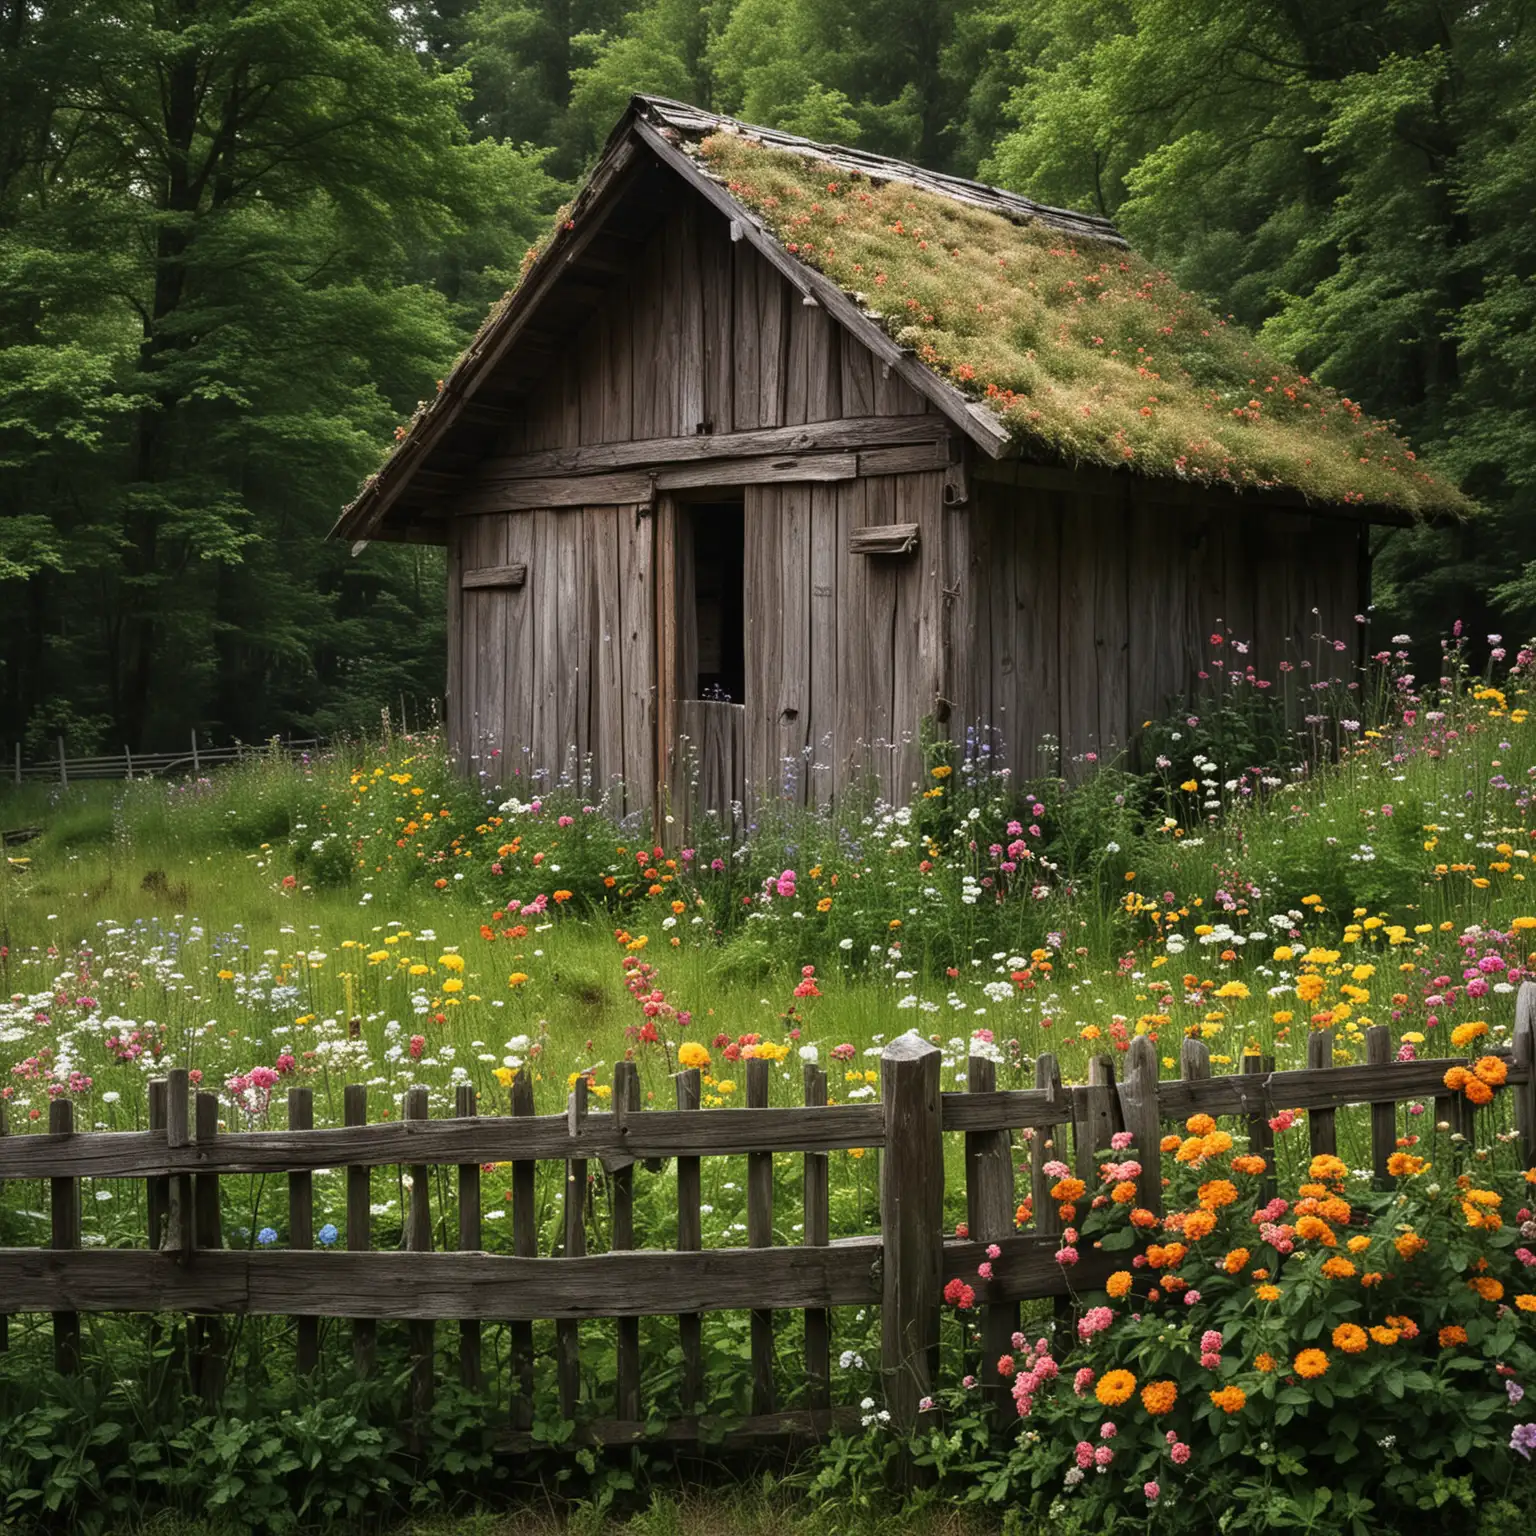 Rustic Charm Old Wooden Hut Surrounded by Forest and Flowers